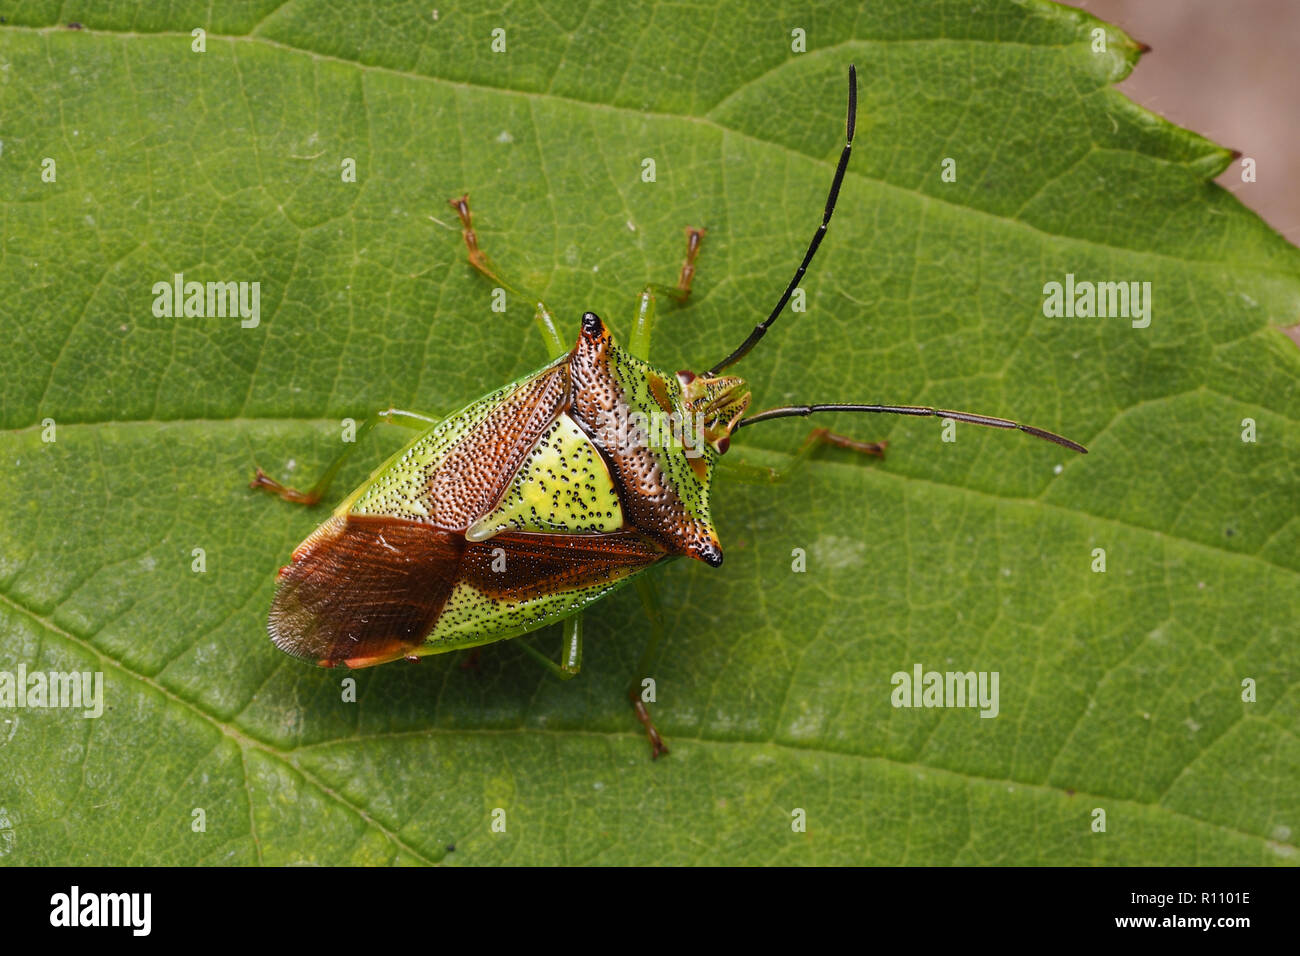 Top down view of a Hawthorn Shieldbug (Acanthosoma haemorrhoidale) at rest on leaf. Tipperary, Ireland Stock Photo